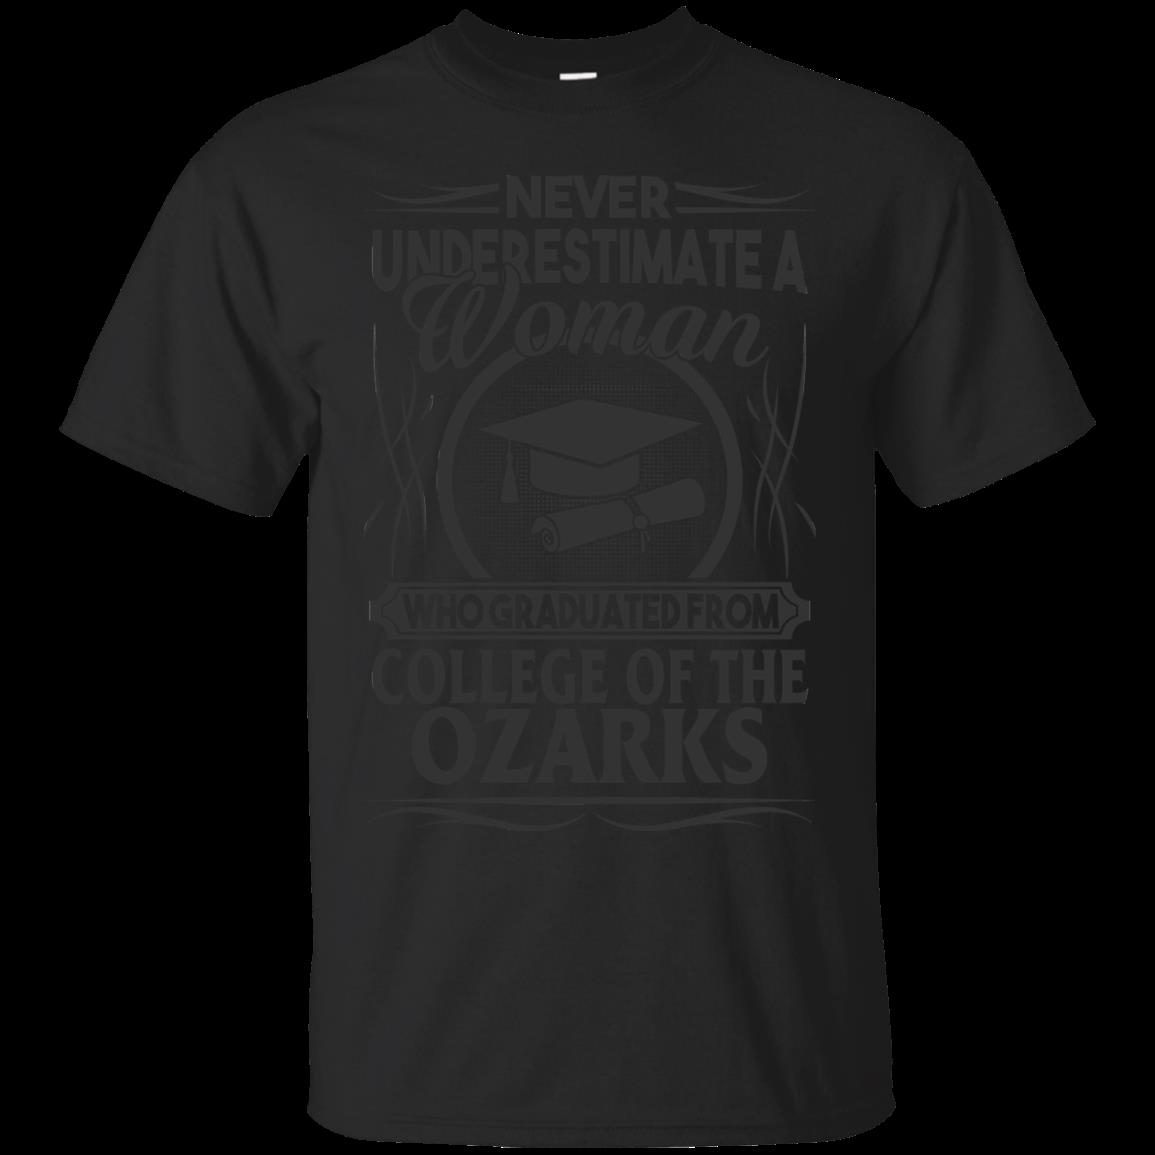 College Of The Ozarks Graduate Woman Shirts Never Underestimate